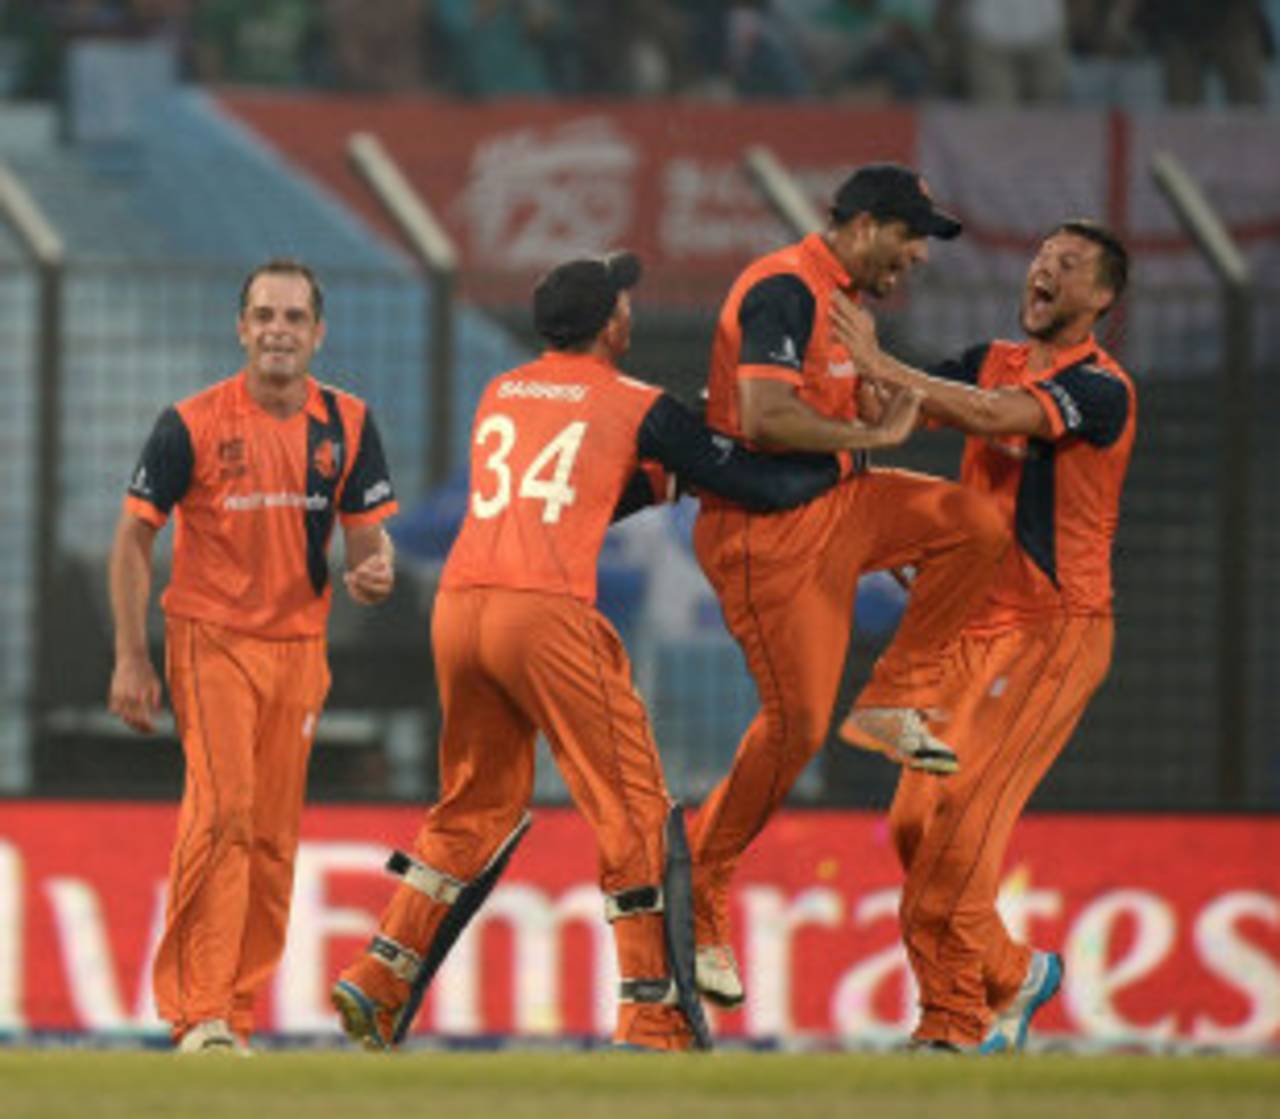 Netherlands are elated with the run-out of Tim Bresnan, England v Netherlands, World T20, Group 1, Chittagong, March 31, 2014